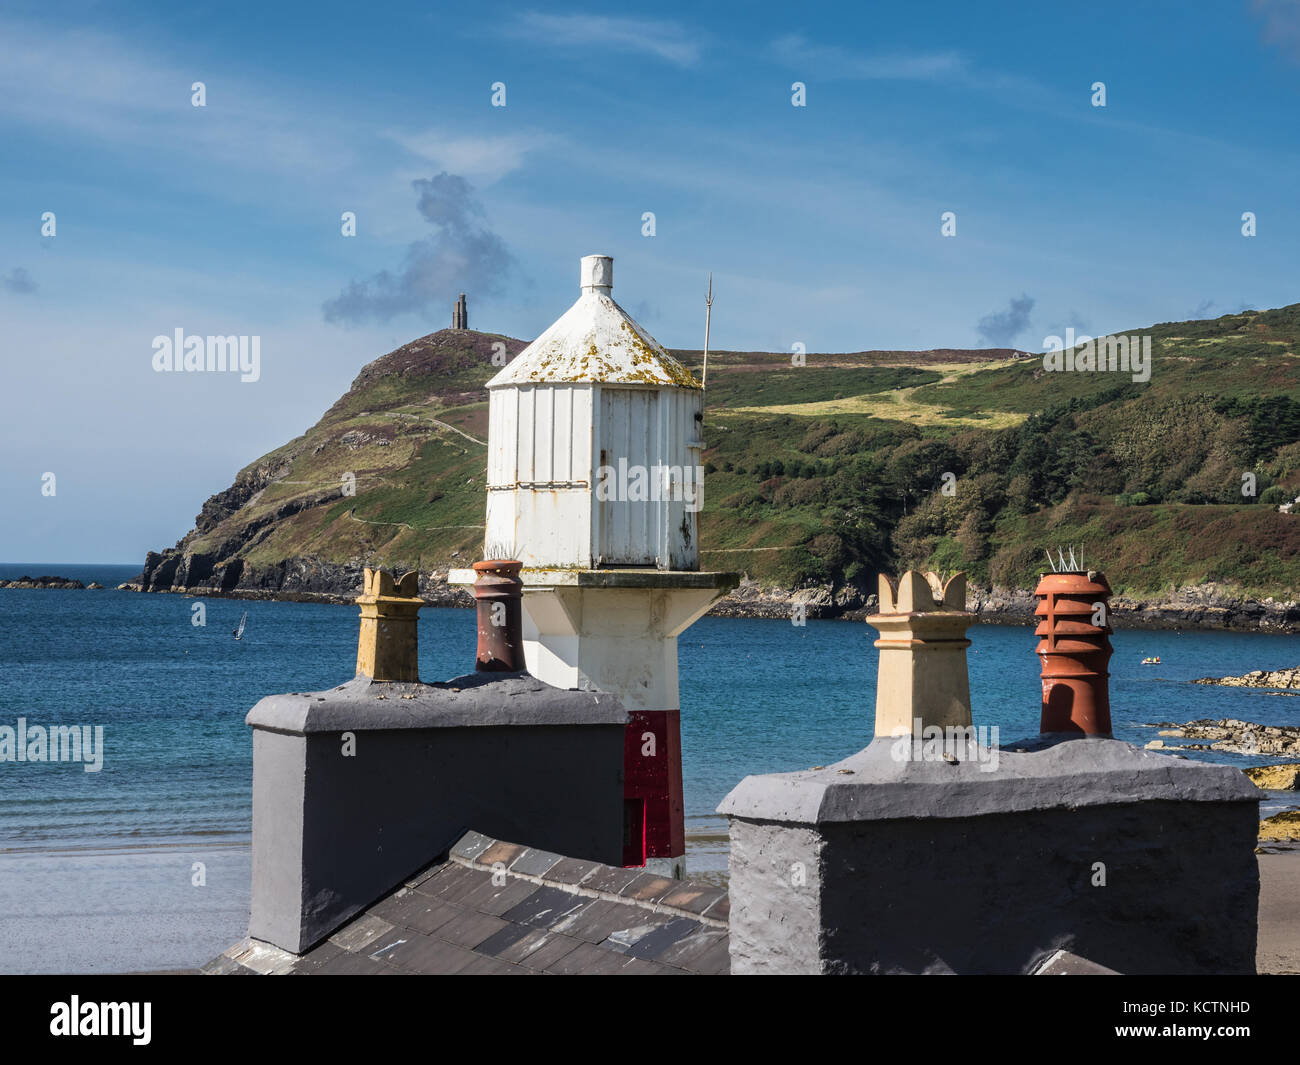 Port Erin Lighthouse over the rooftop of Cosy Nook Cafe with Bradda Head in the background. Isle of Man. Stock Photo